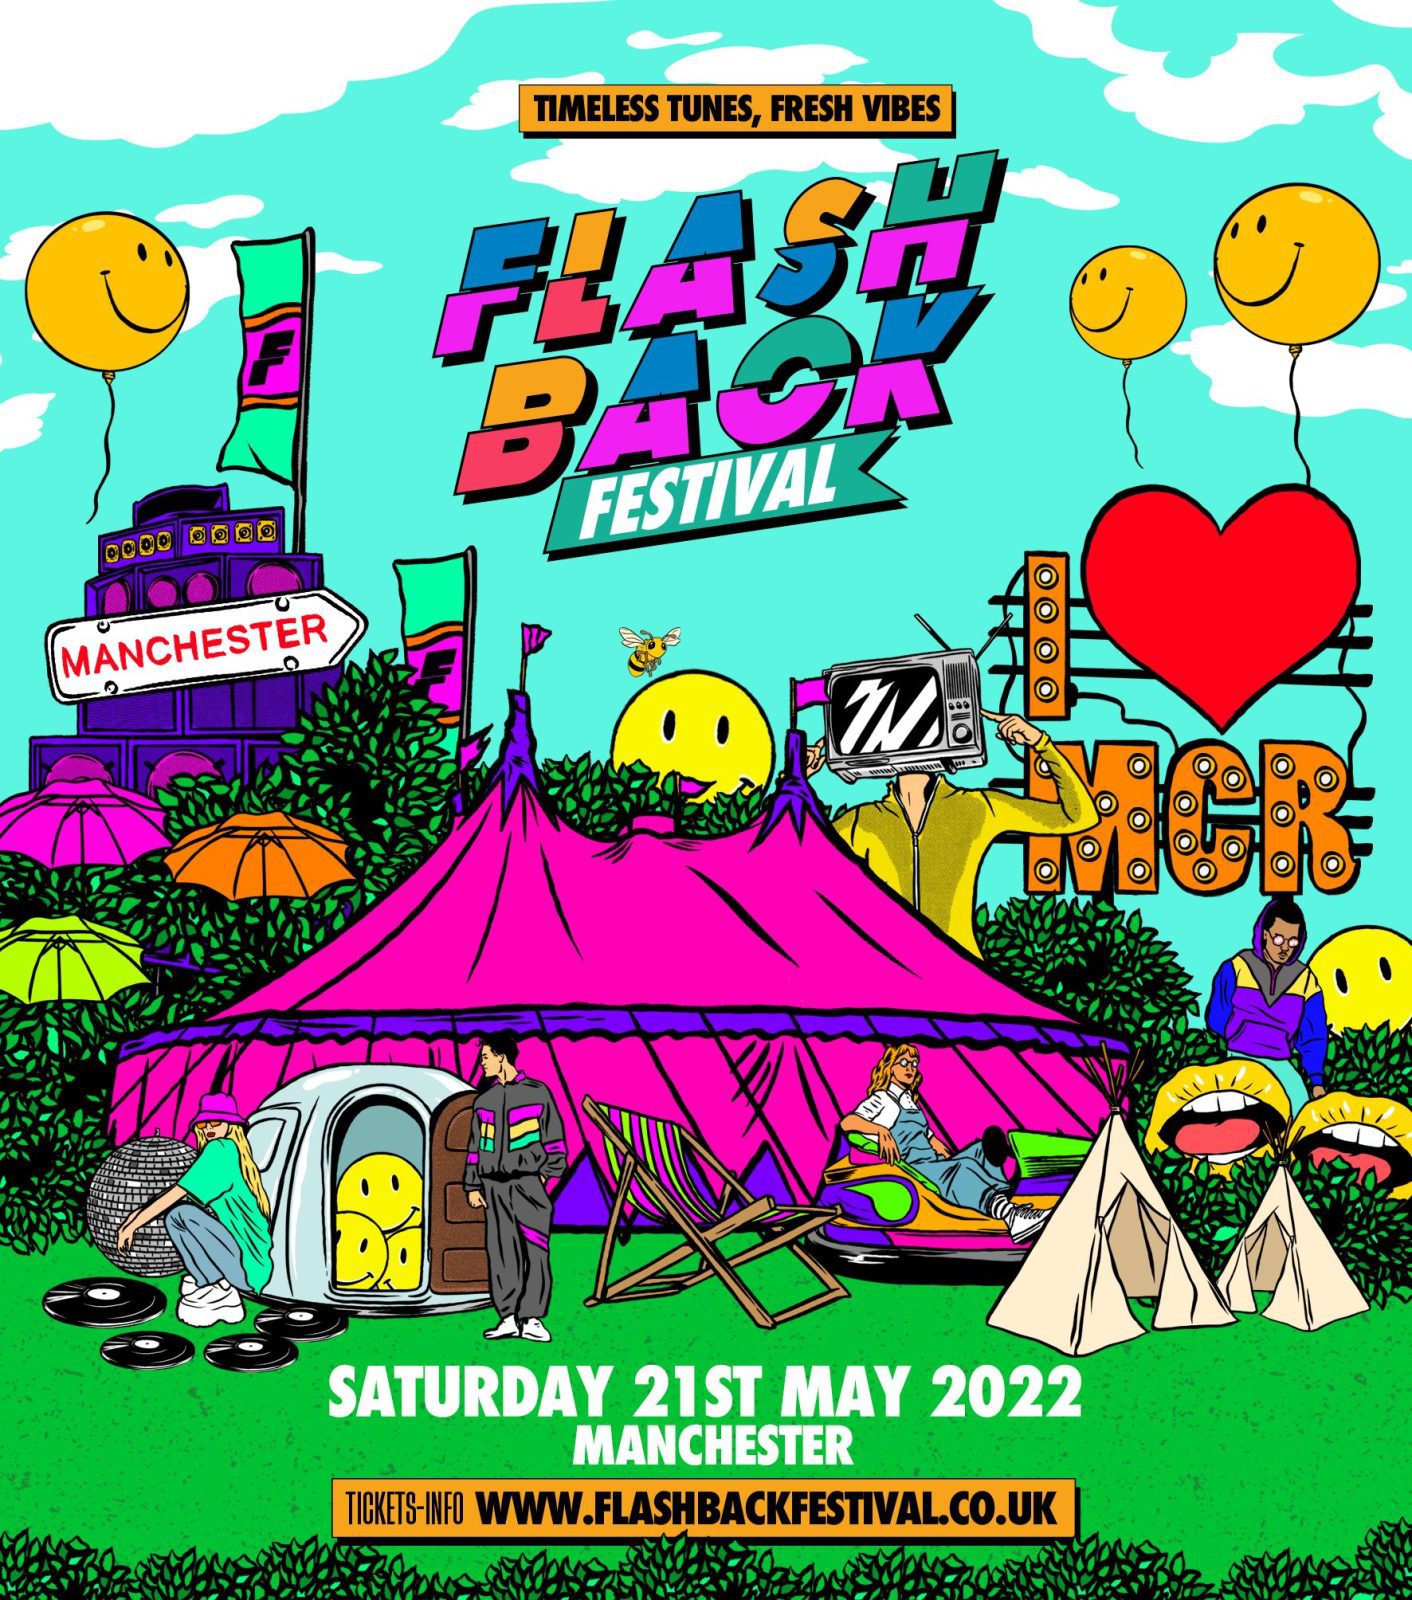 A &#8216;flashback&#8217; festival full of 90s and 00s dance music is kick-starting summer in Manchester, The Manc